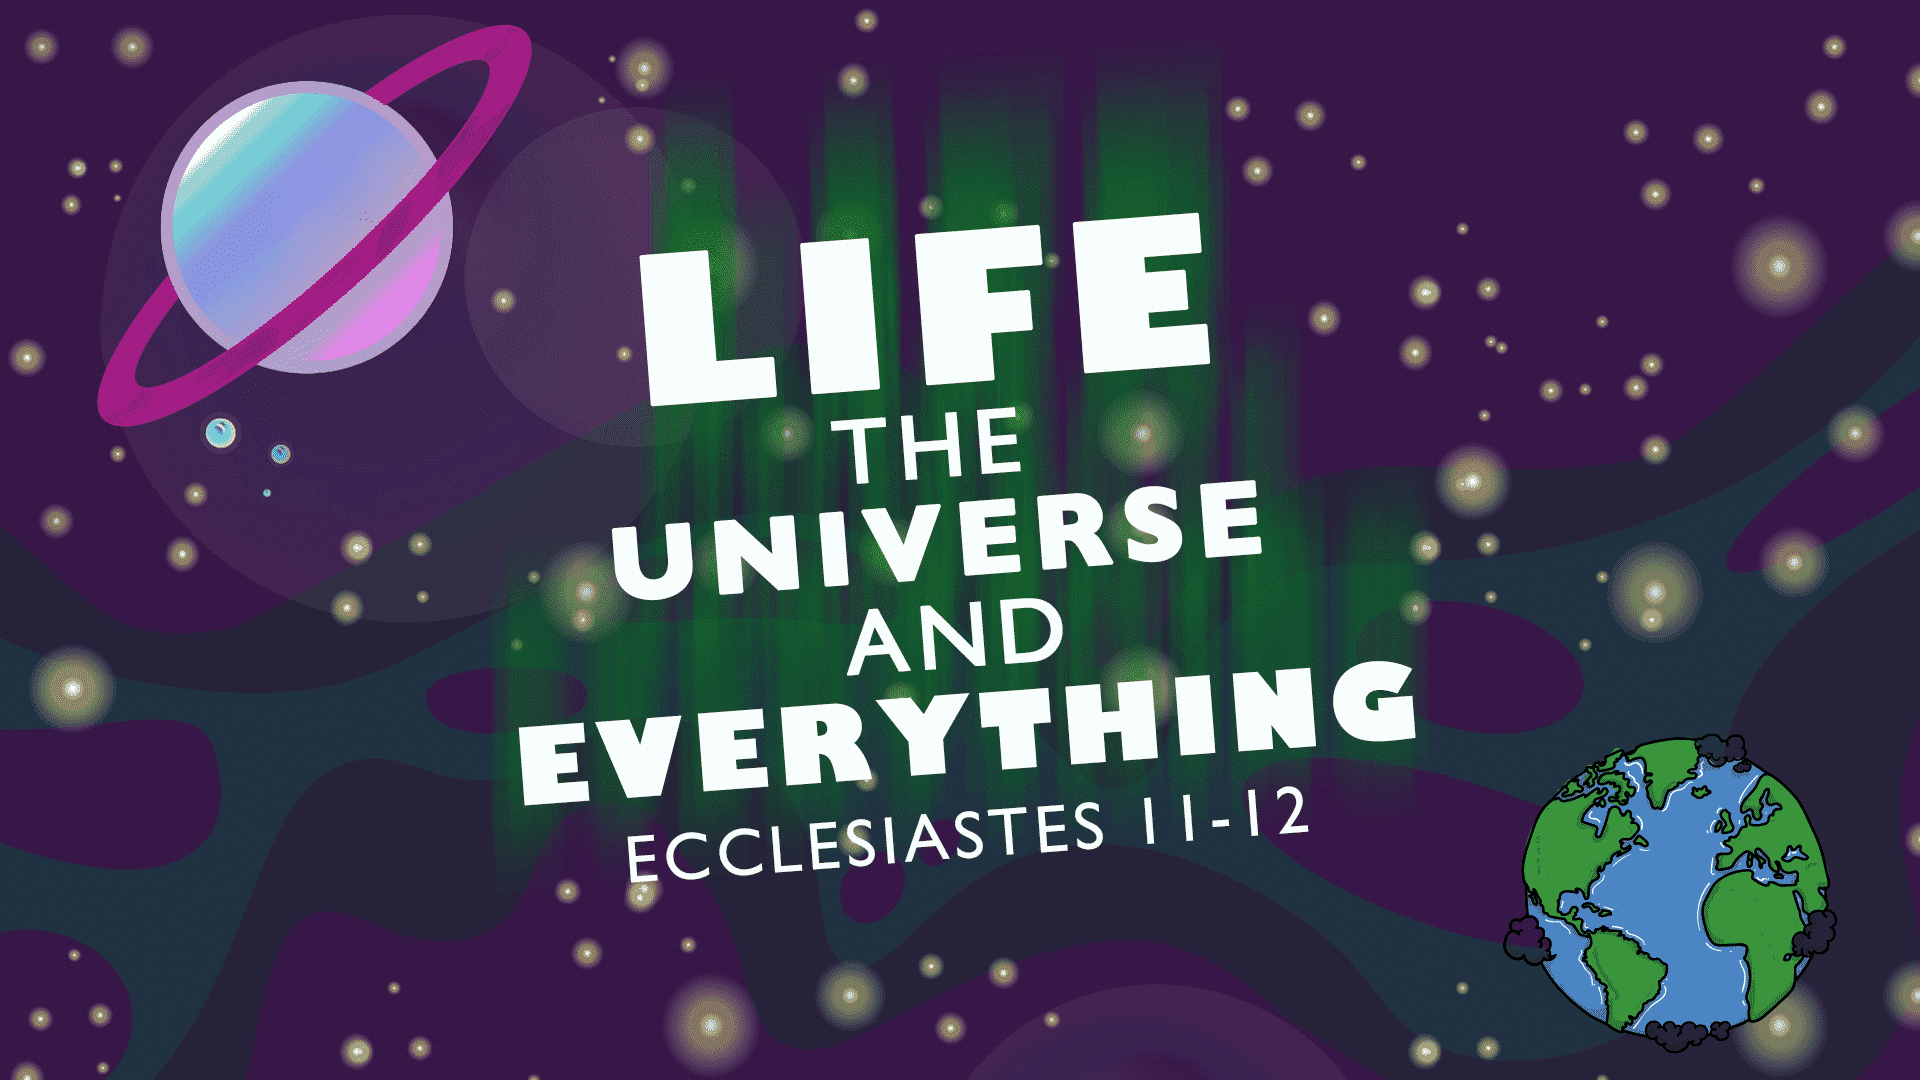 web2-life-the-universe-and-everything-title-gfx-final2